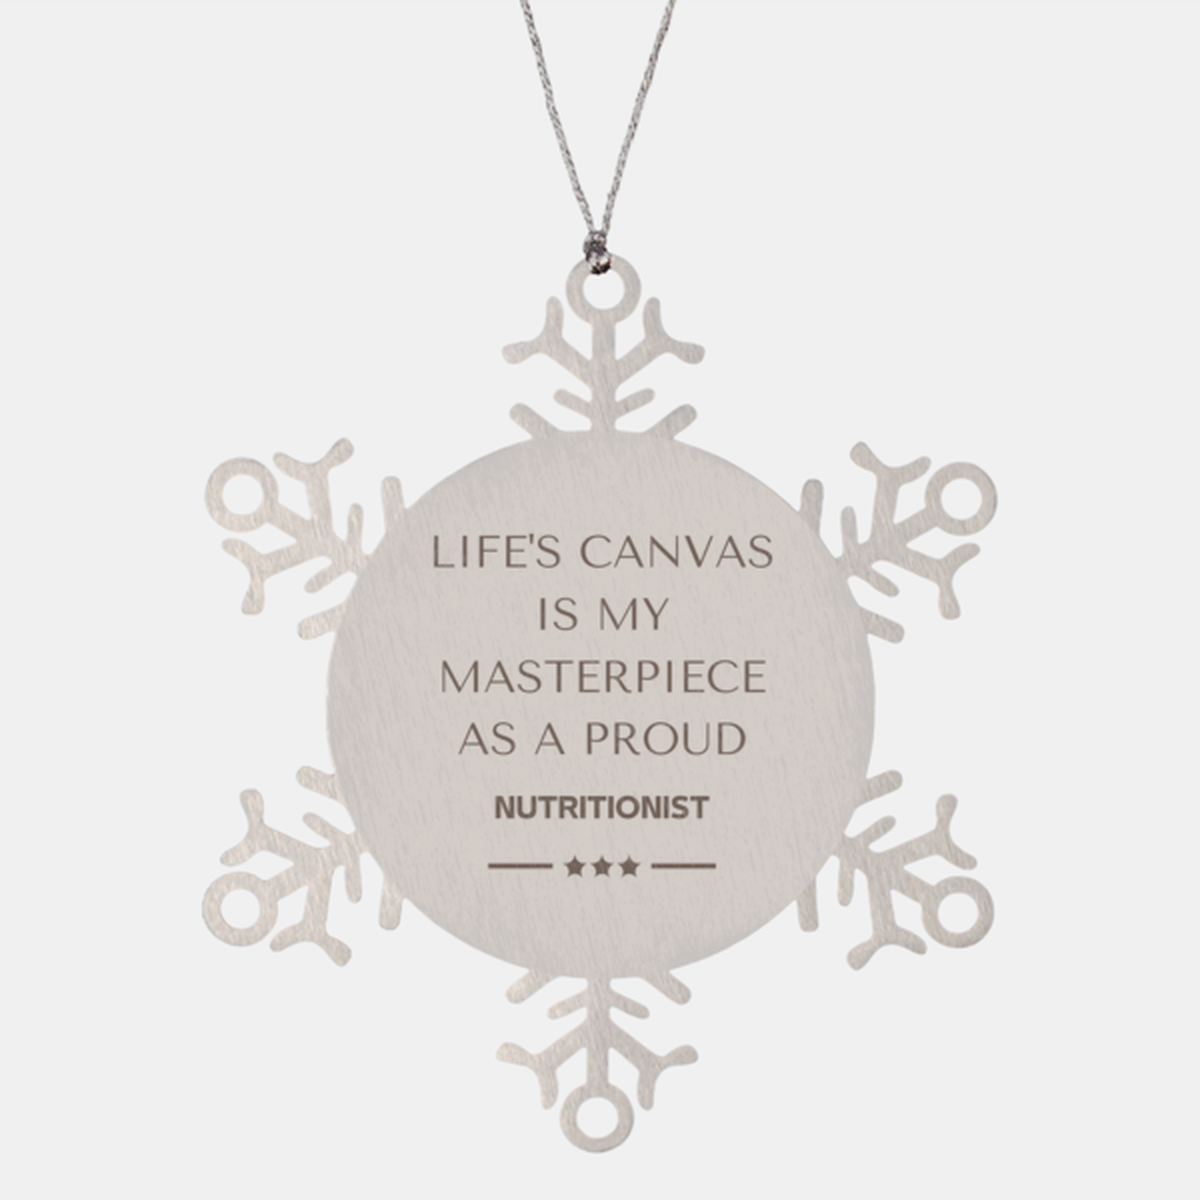 Proud Nutritionist Gifts, Life's canvas is my masterpiece, Epic Birthday Christmas Unique Snowflake Ornament For Nutritionist, Coworkers, Men, Women, Friends